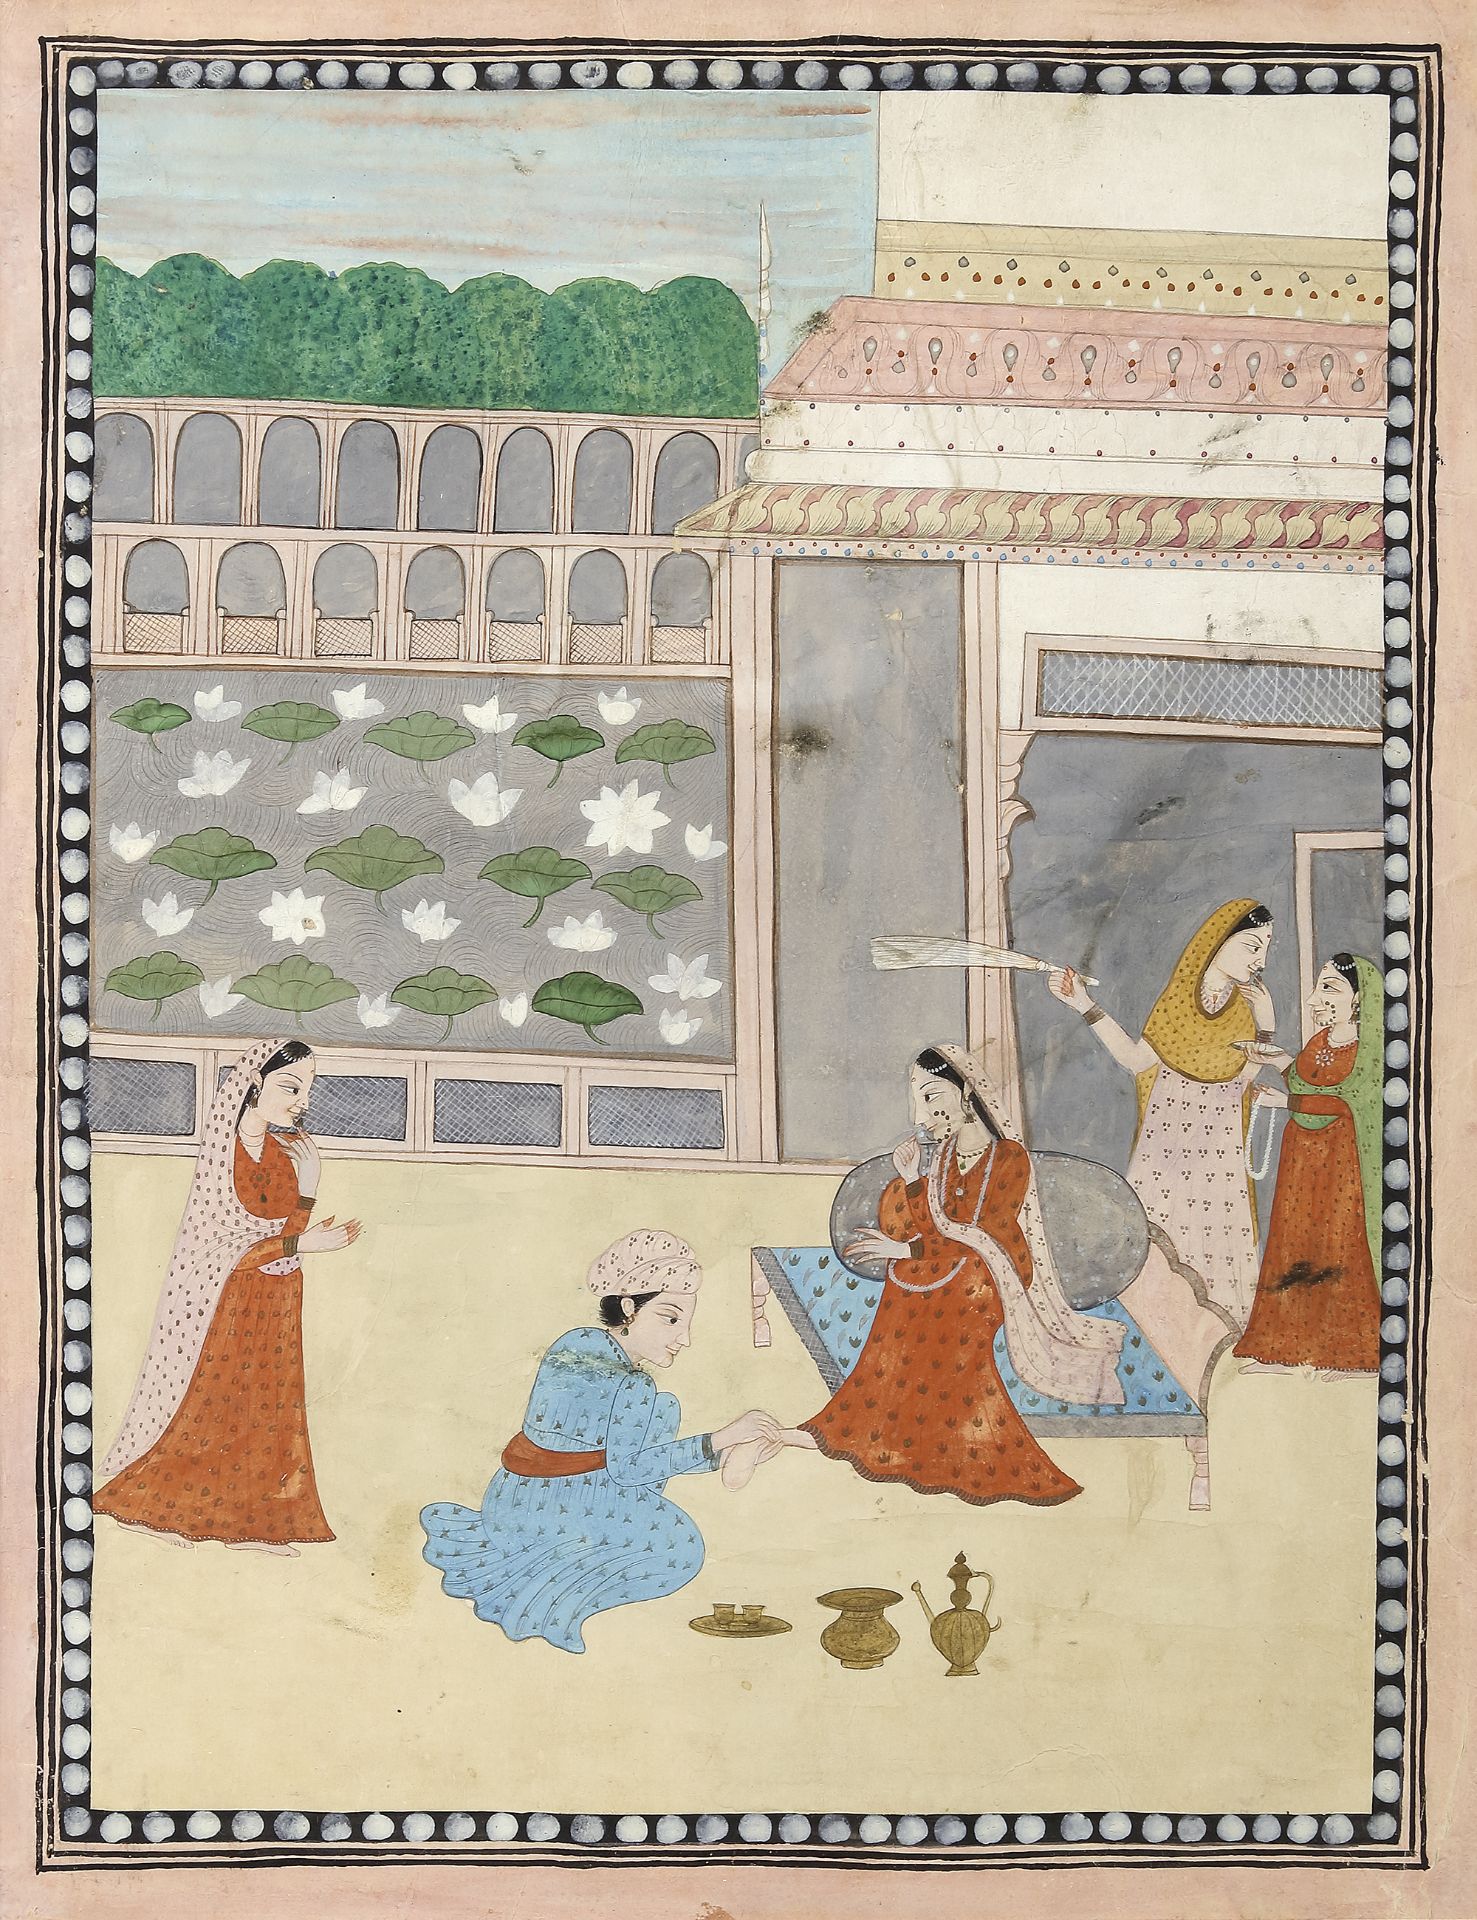 A PRINCESS IN A COURTYARD WITH ATTENDANTS, KANGRA NORTH INDIA, LATE 19TH CENTURY - Image 2 of 2